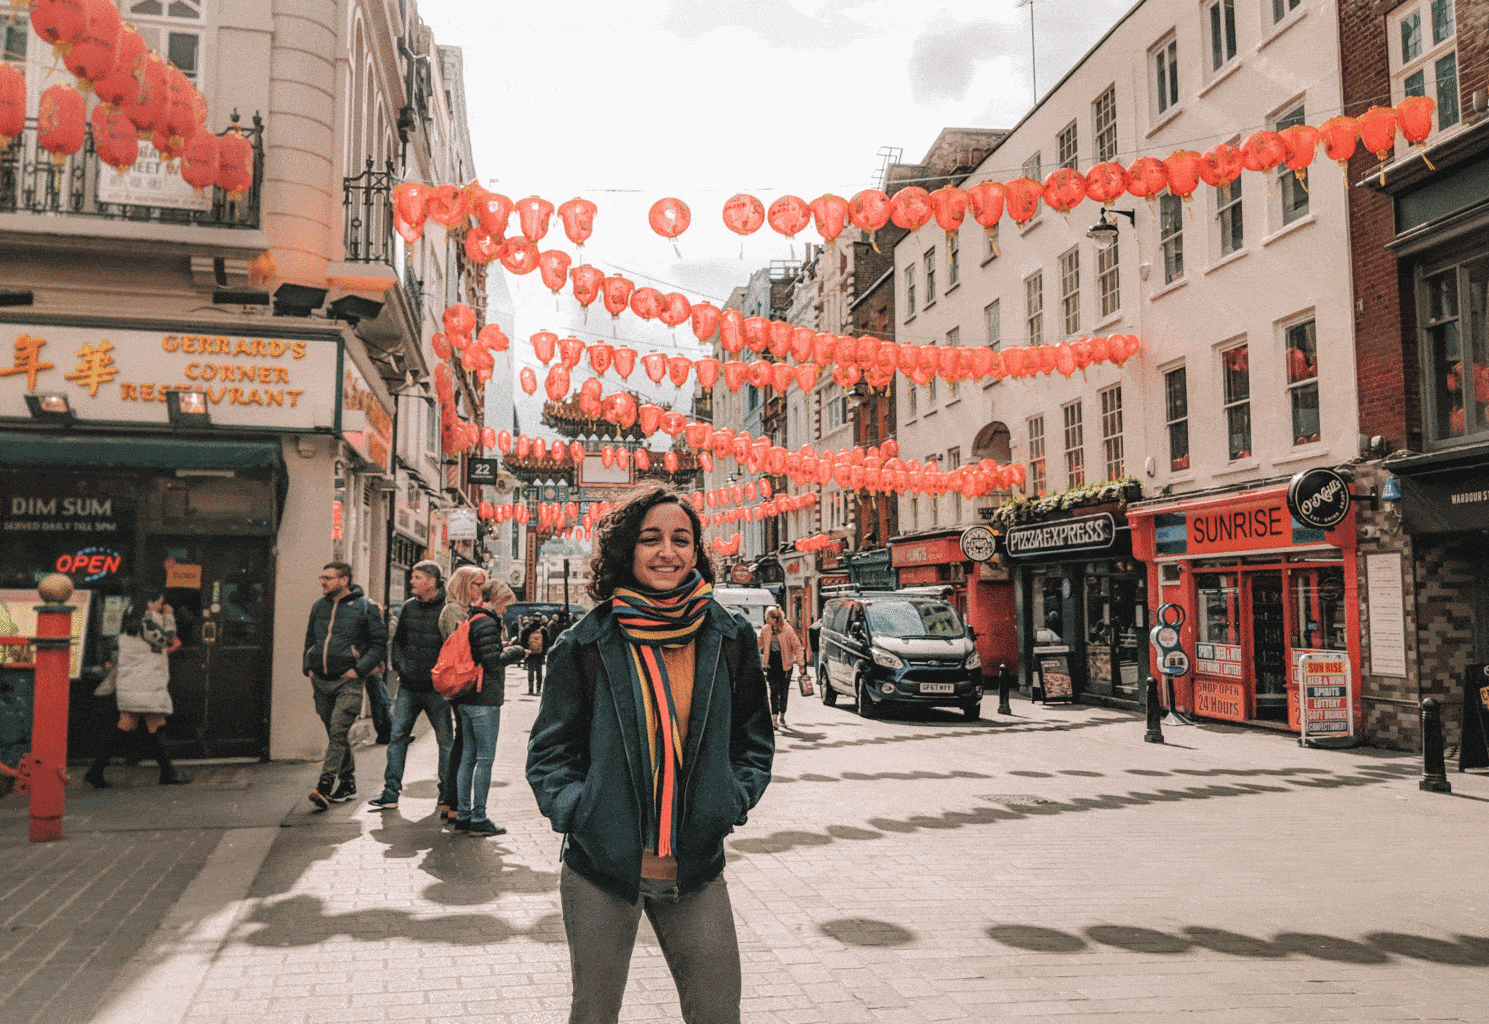 How to spend 24 hours eating the best food in Chinatown London